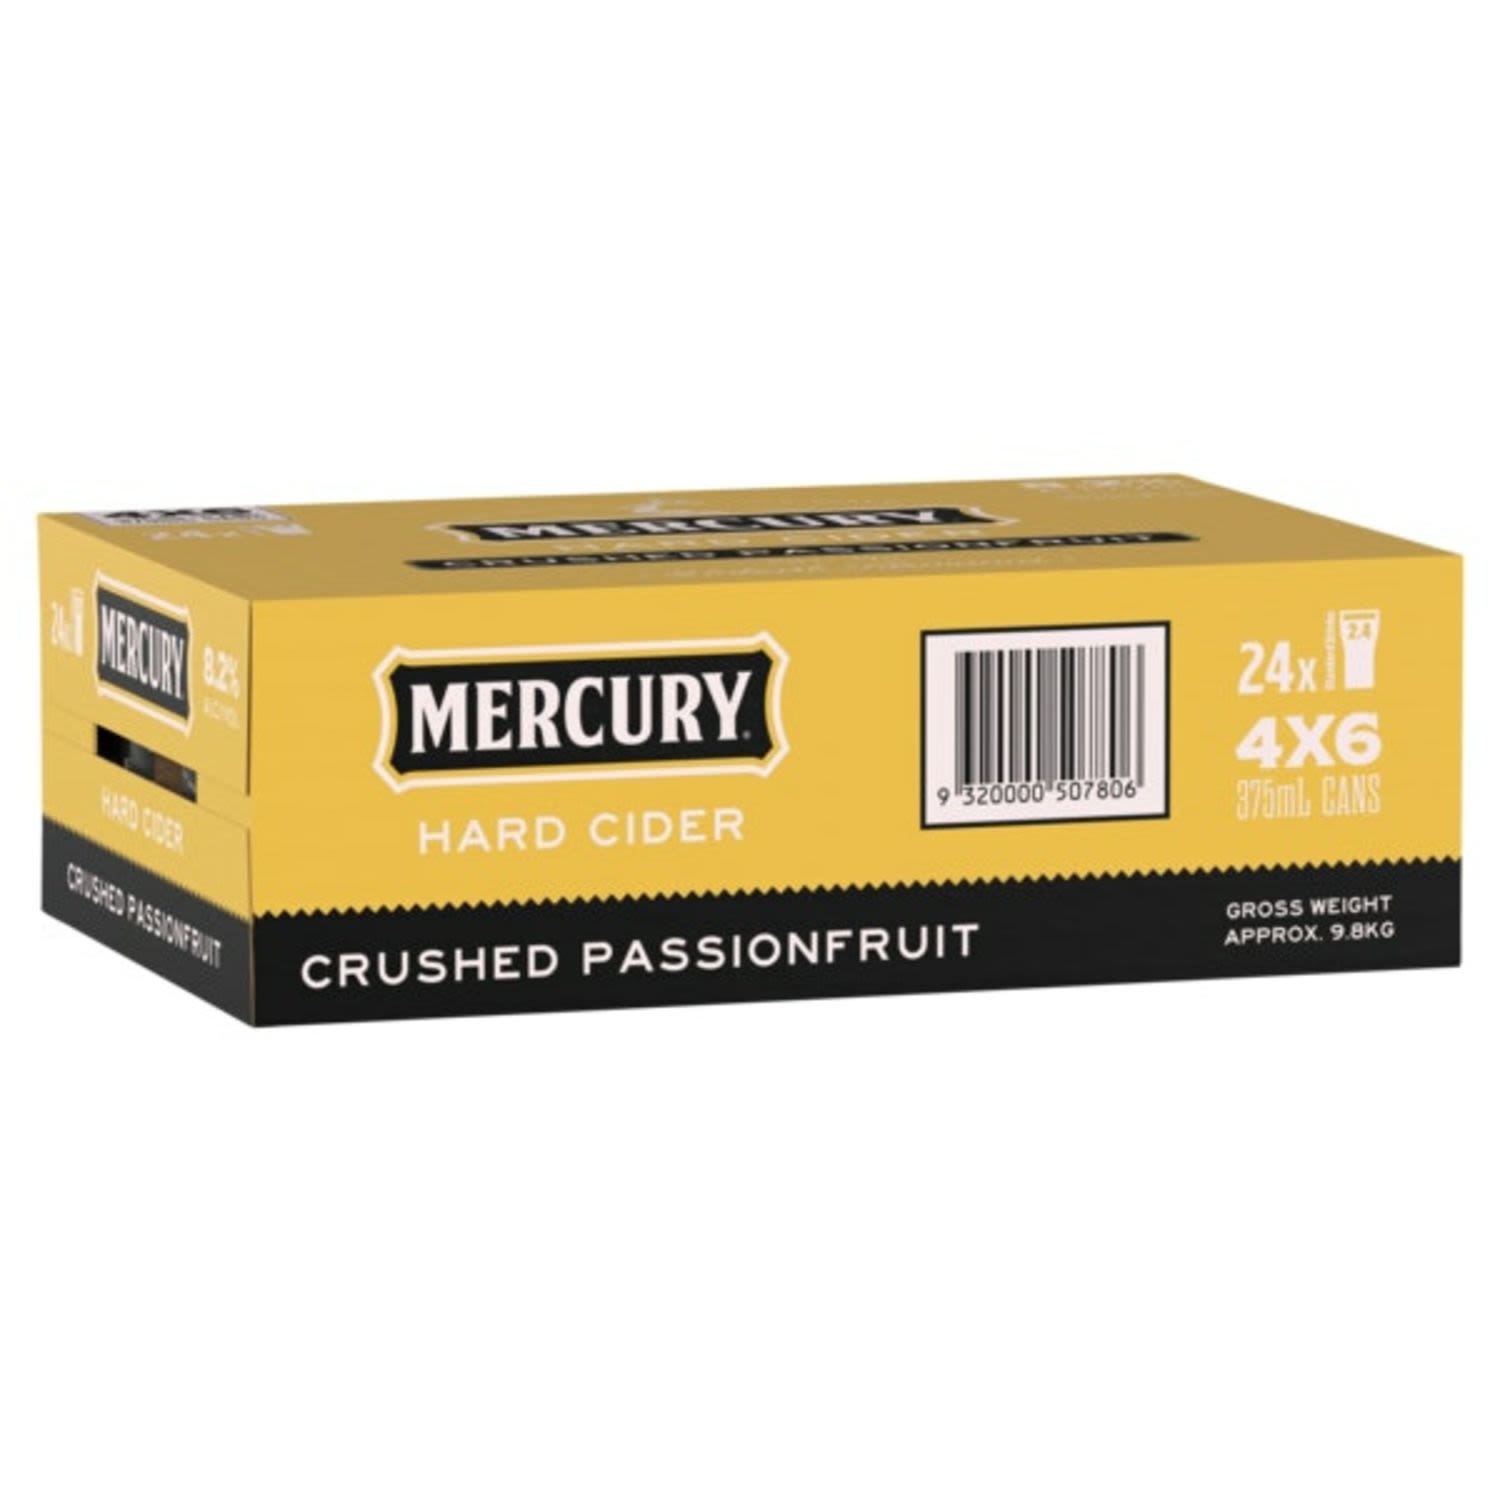 Mercury Hard Cider Crushed Passionfruit Can Case 375mL 24 Pack